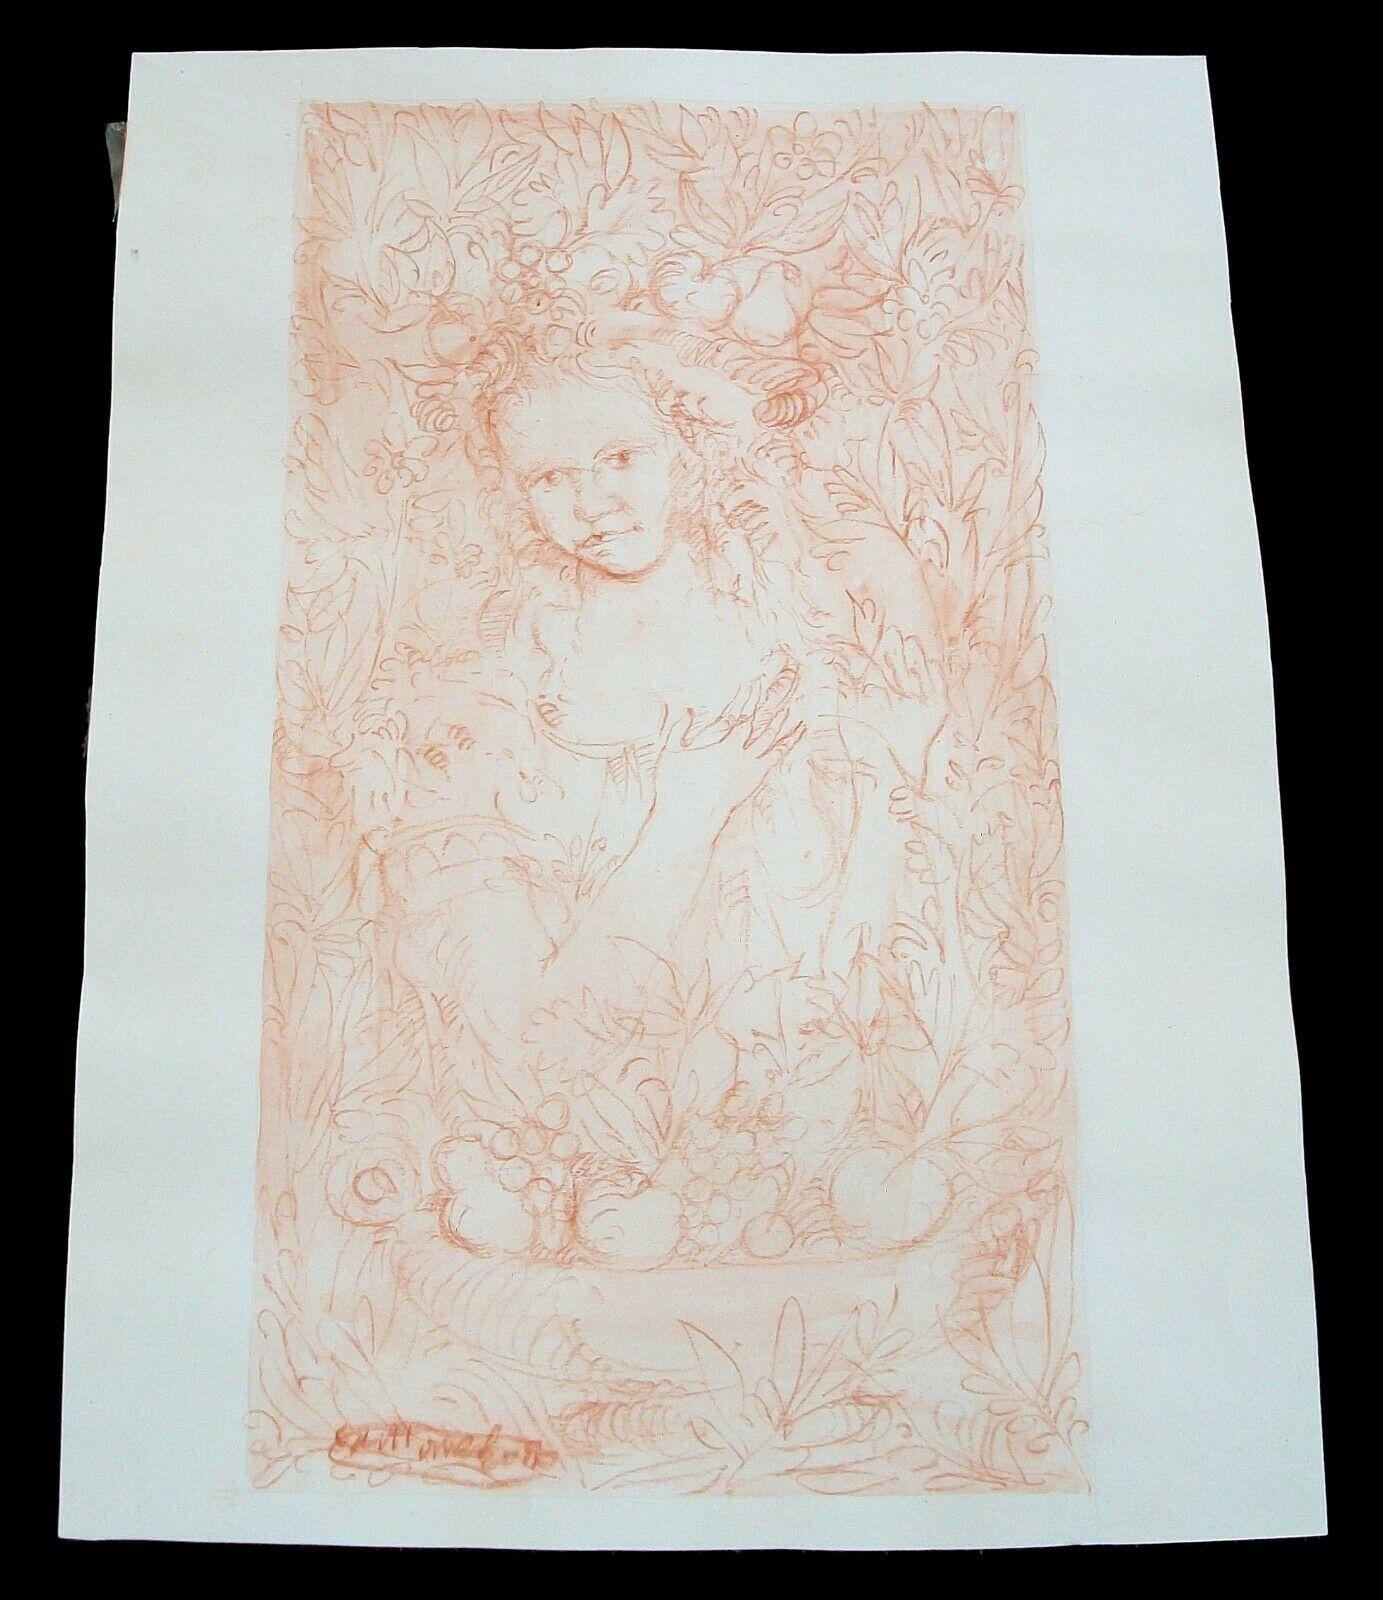 Paper Renaissance Style Sanguine & Watercolor Drawing, Signed, Italy, 20th Century For Sale